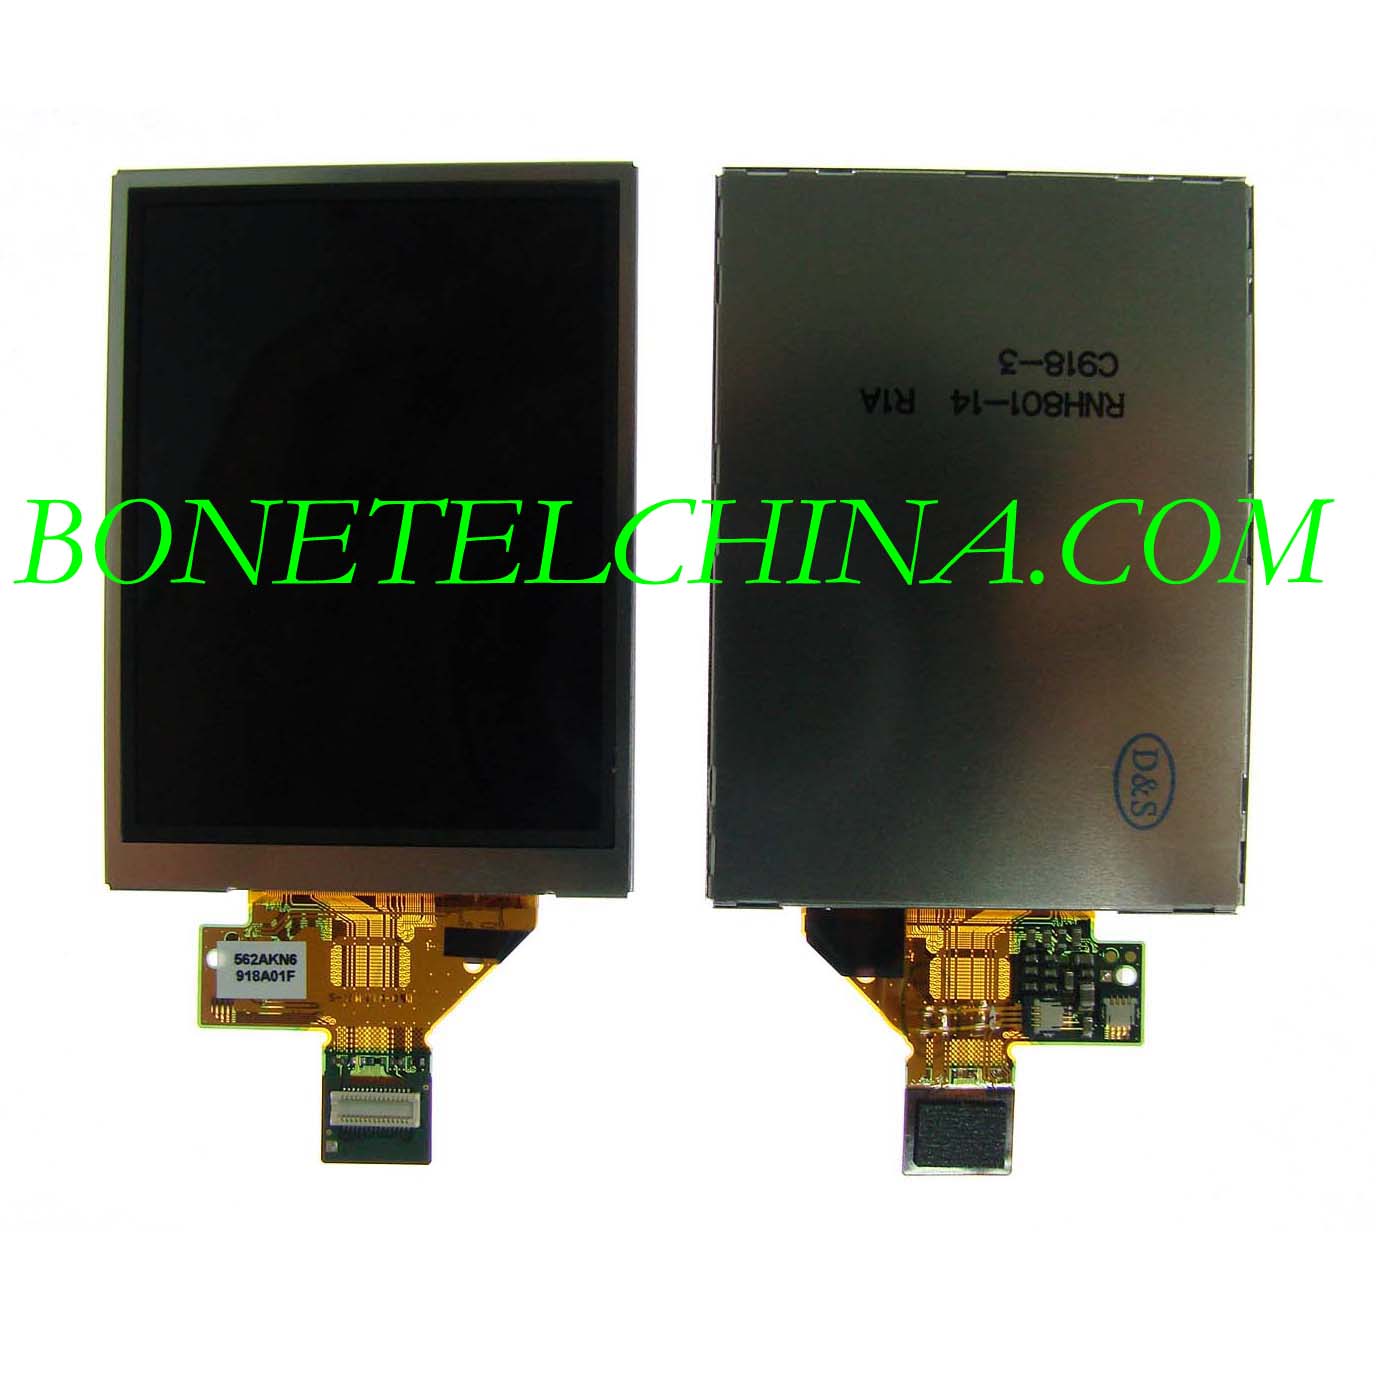 W960 LCD for Sony Ericsson